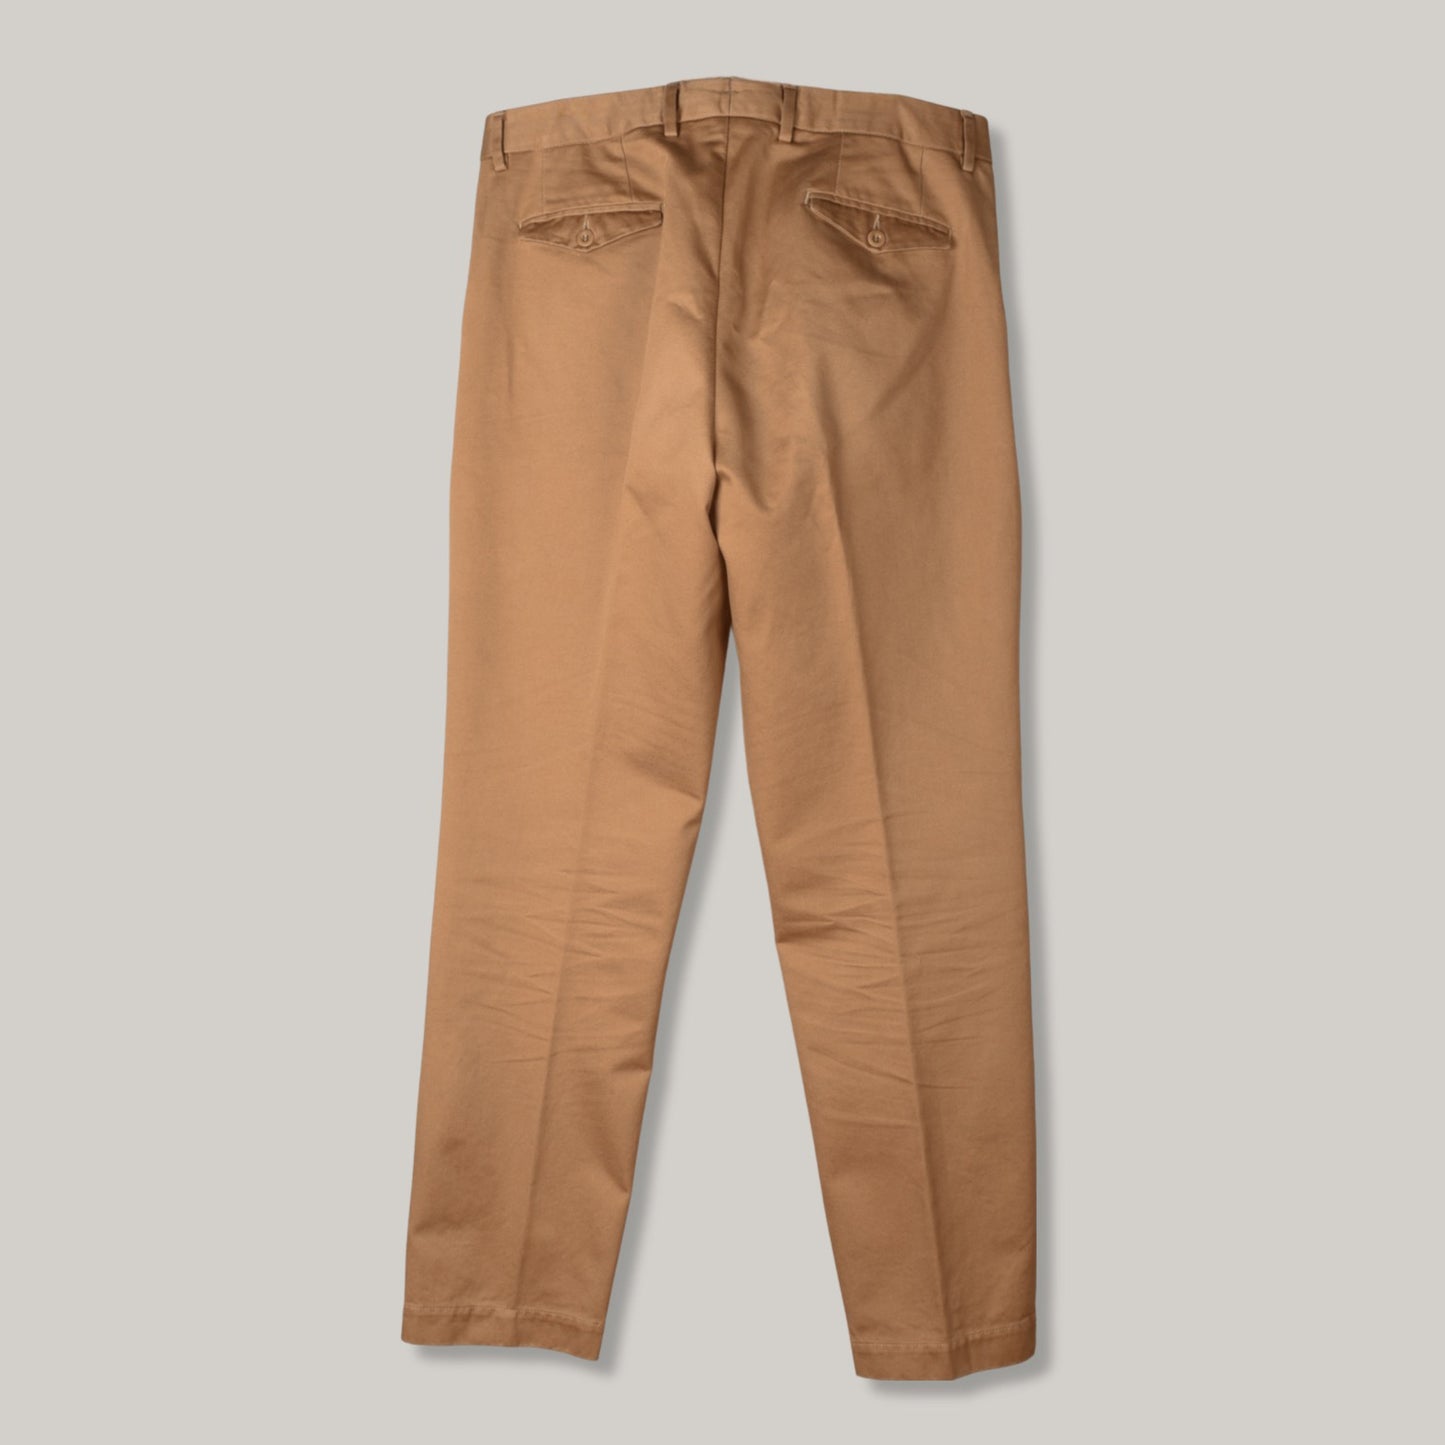 USED EAST HARBOUR SURPLUS MARTIN PLEATED TWILL CHINO